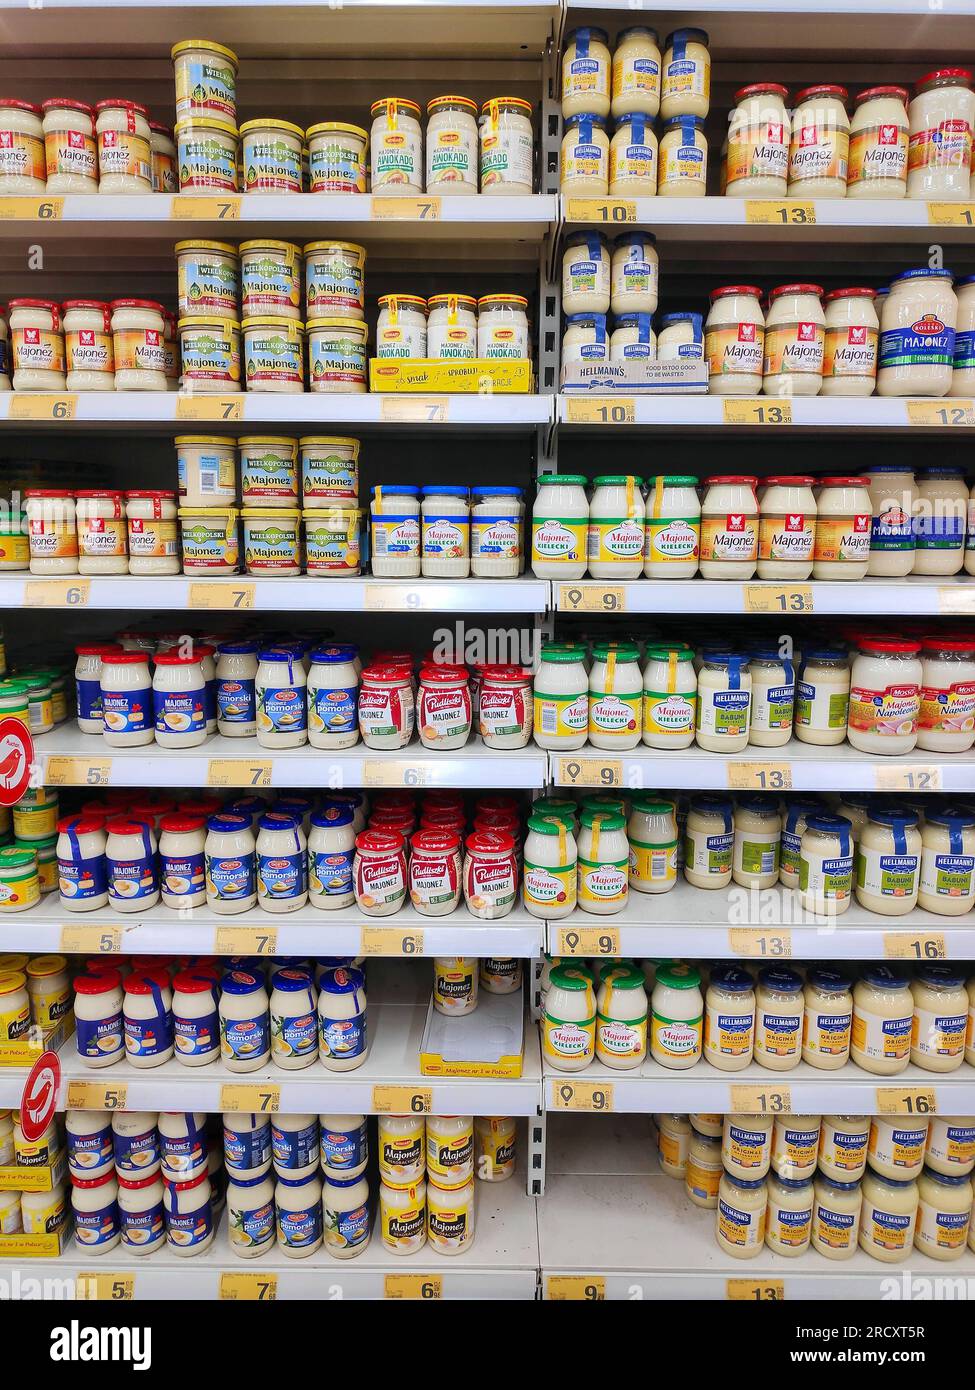 KATOWICE, POLAND - JANUARY 13, 2023: Various types and brands of mayonnaise in a supermarket in Katowice, Poland. Stock Photo